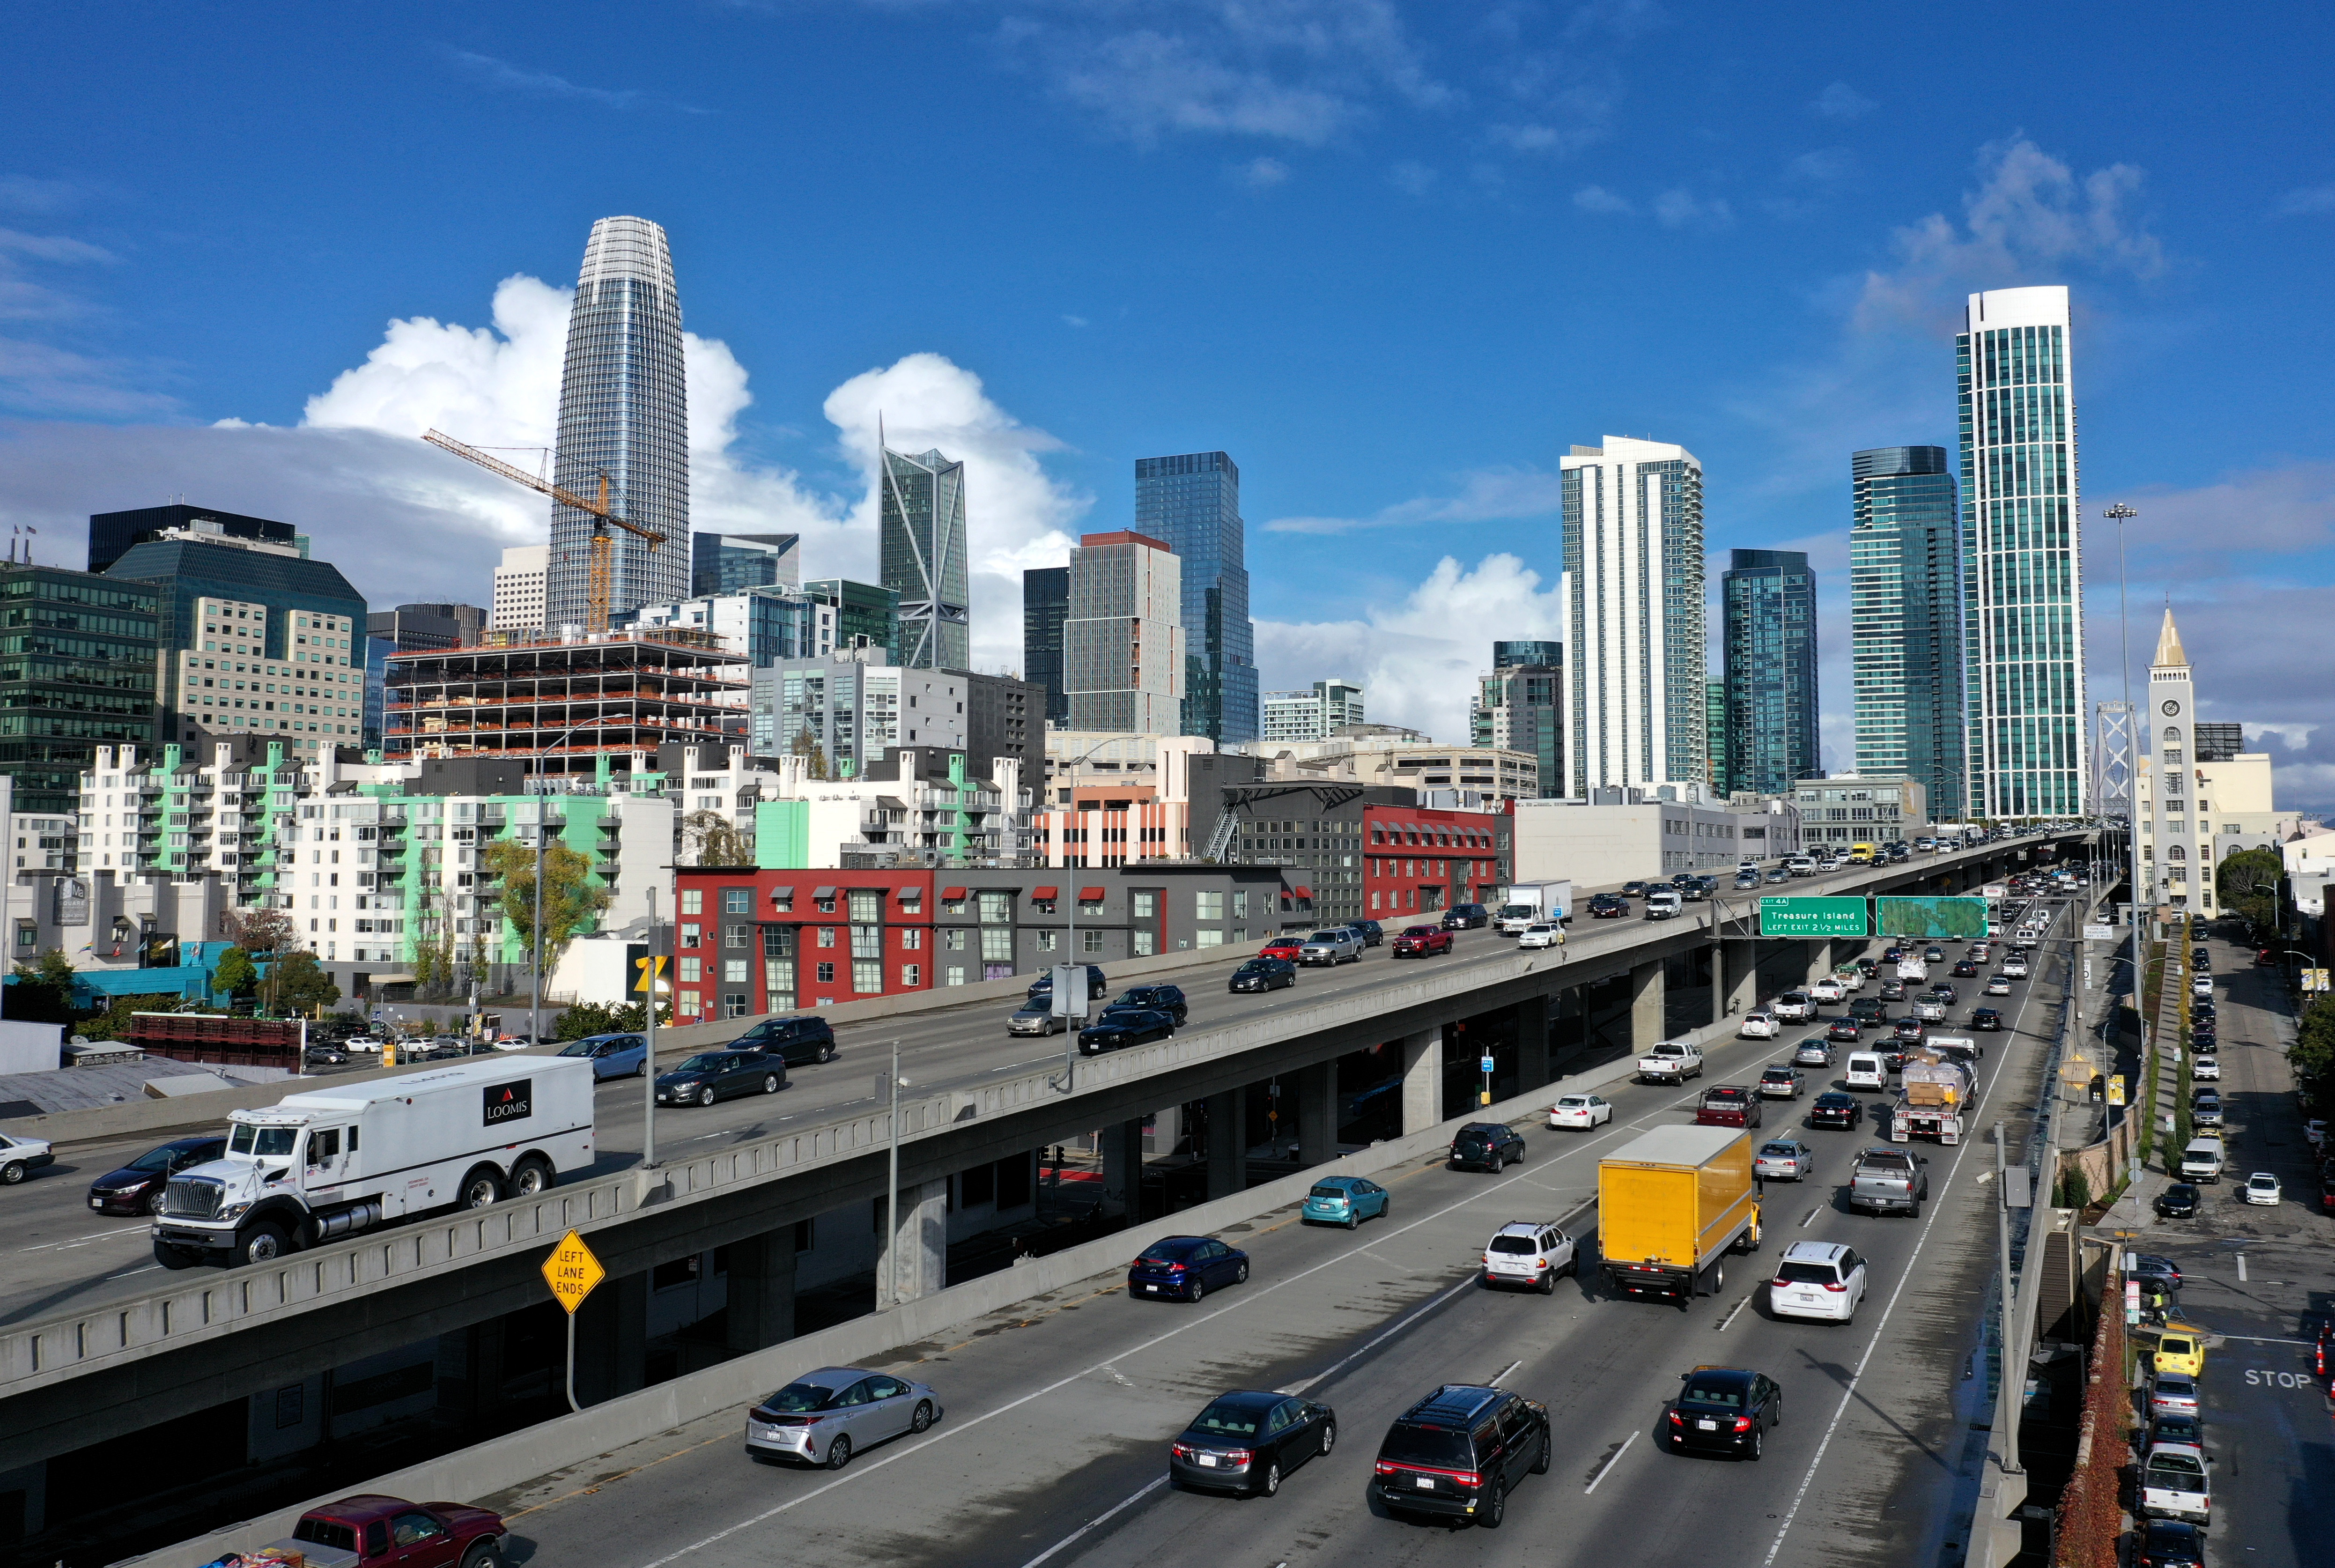 Traffic on a busy freeway, photographed from above, with tall, glass-encased high-rises visible on the horizon.